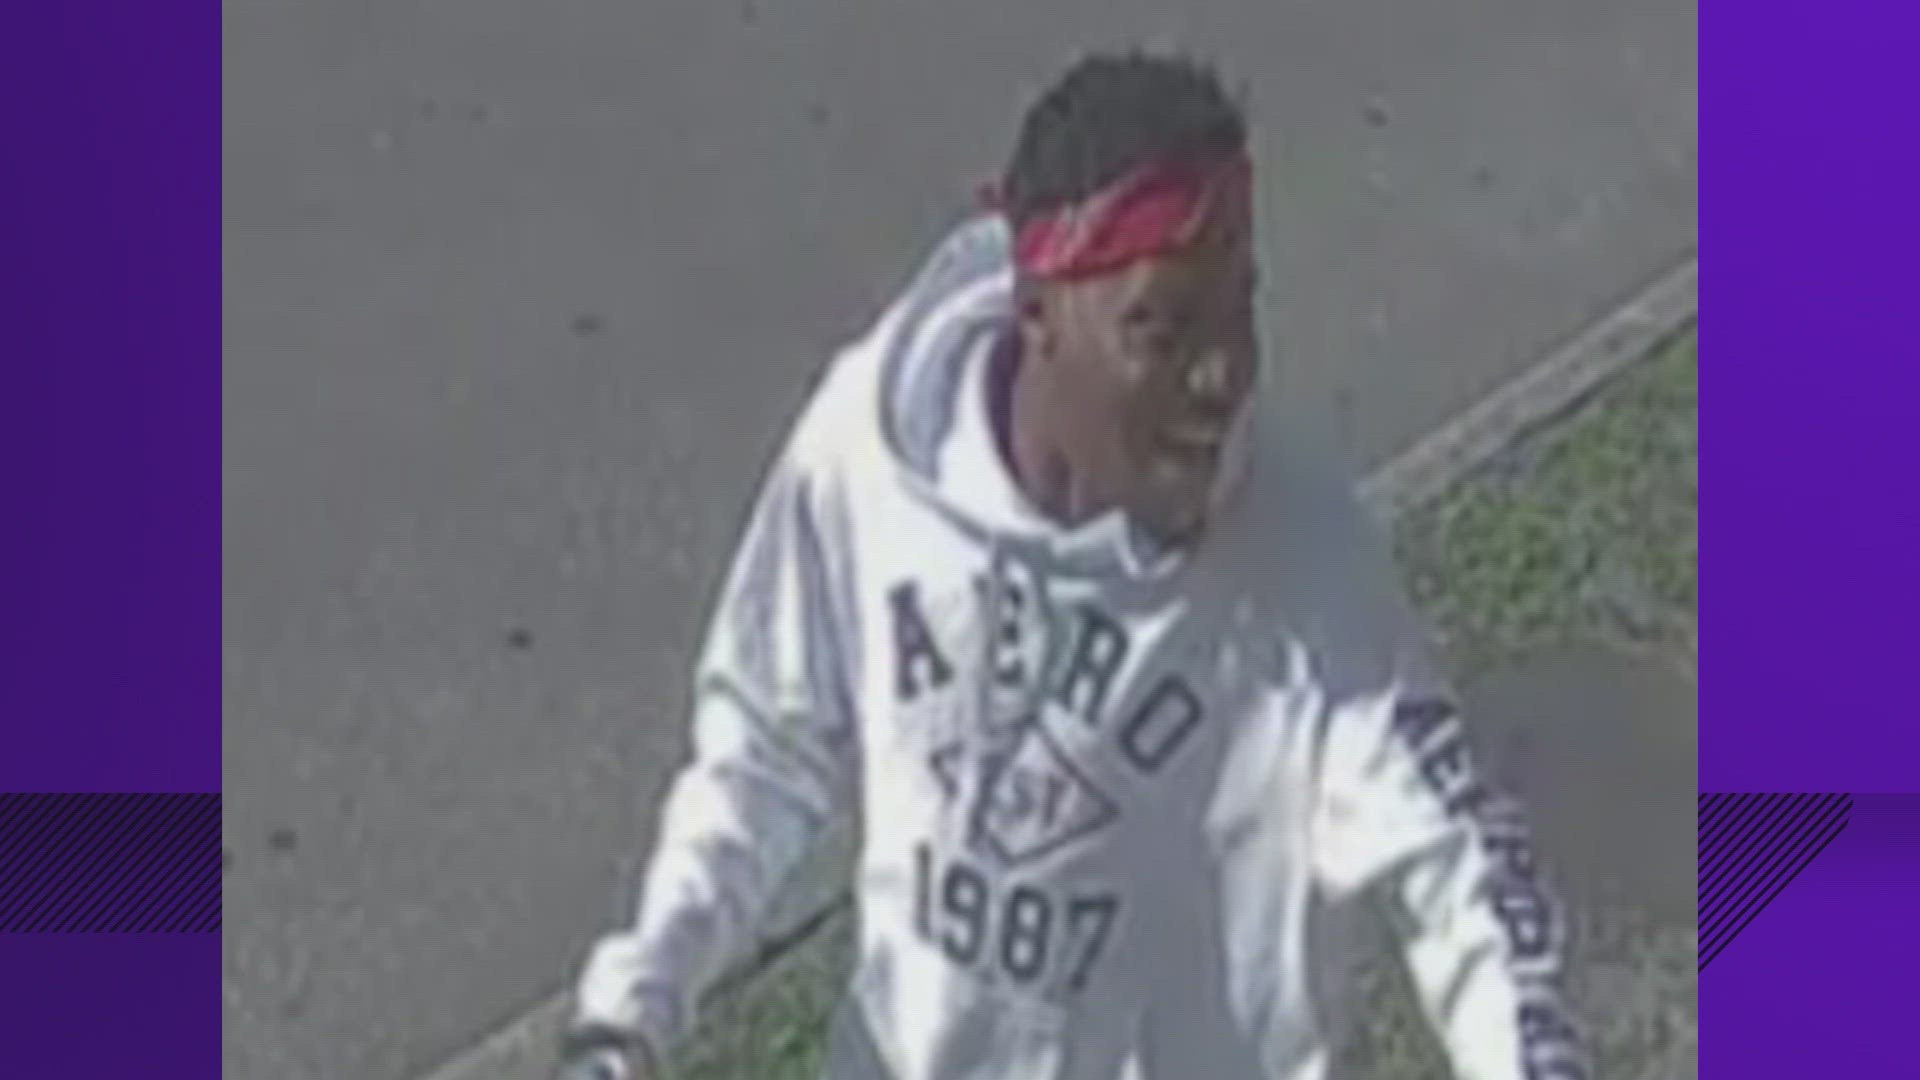 Houston police released a photo of a person they want to talk to about a deadly shooting in Midtown.